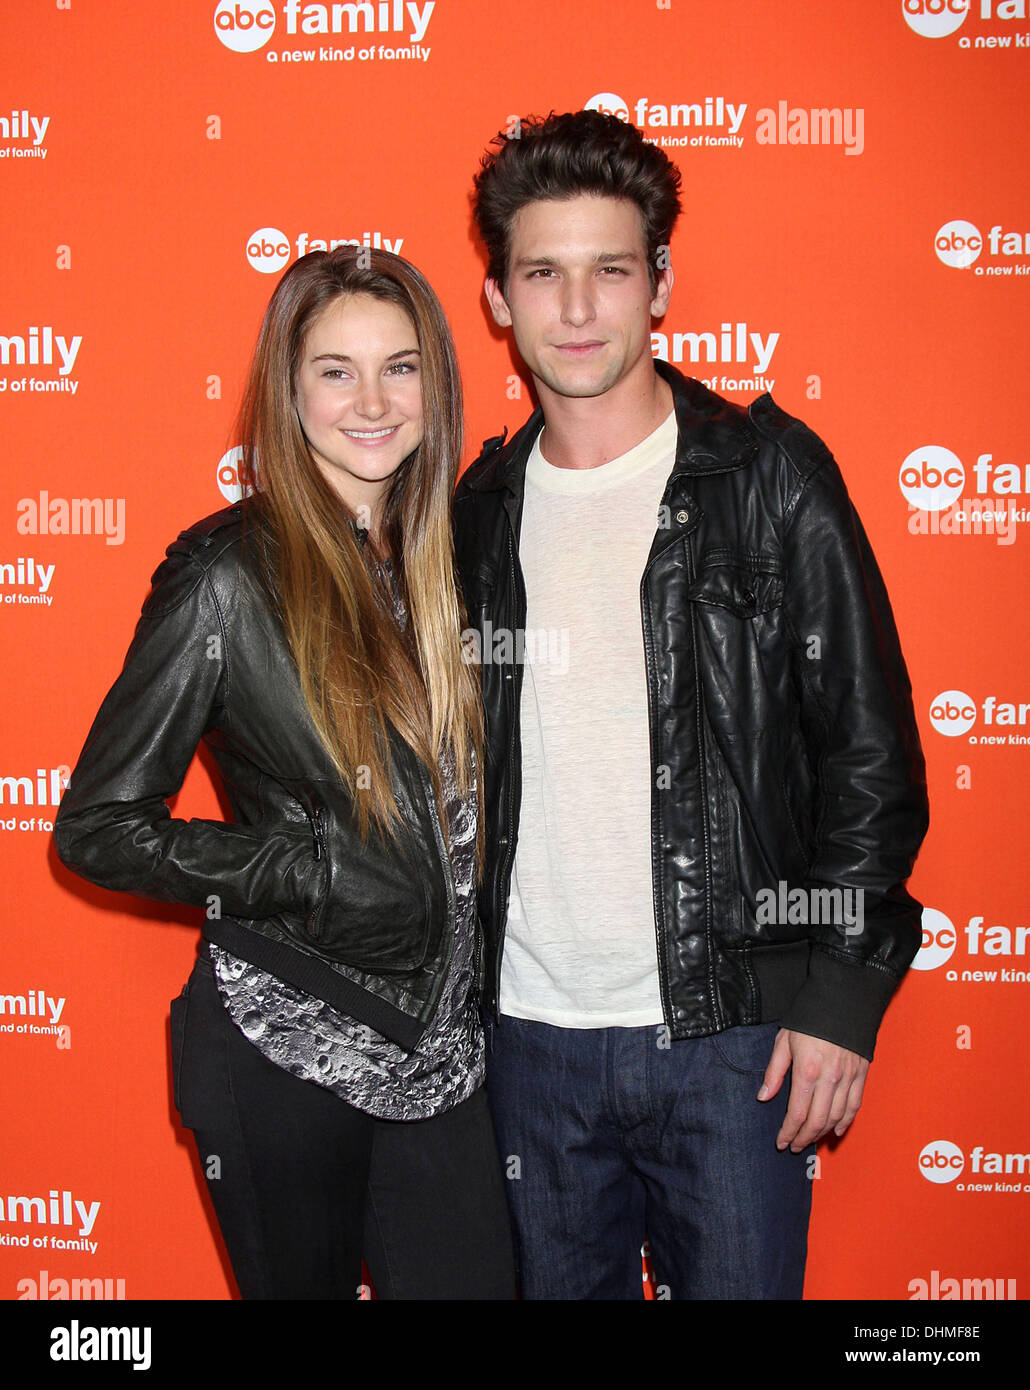 Shailene Woodley, Daren Kagasoff ABC Family West Coast Upfronts party at The Sayers Club Hollywood, California - 01.05.12  Featuring: Shailene Woodley, Daren Kagasoff Where: United States When: 01 May 2012 Stock Photo